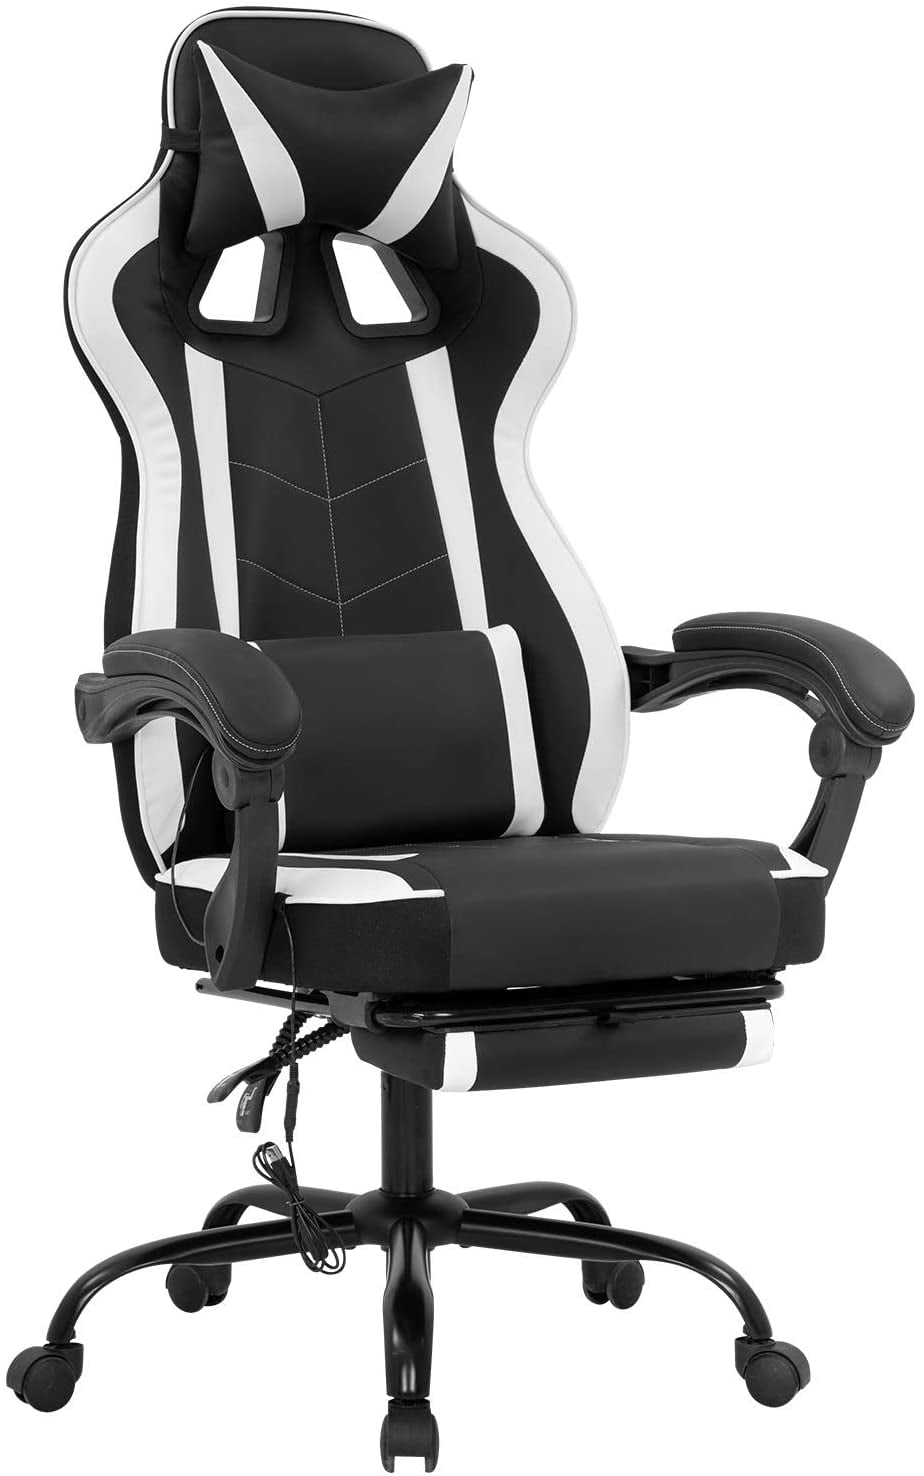 Ergonomic Gaming Chairs Racing Recliner Office Computer Desk Chairs Swivel Seats 